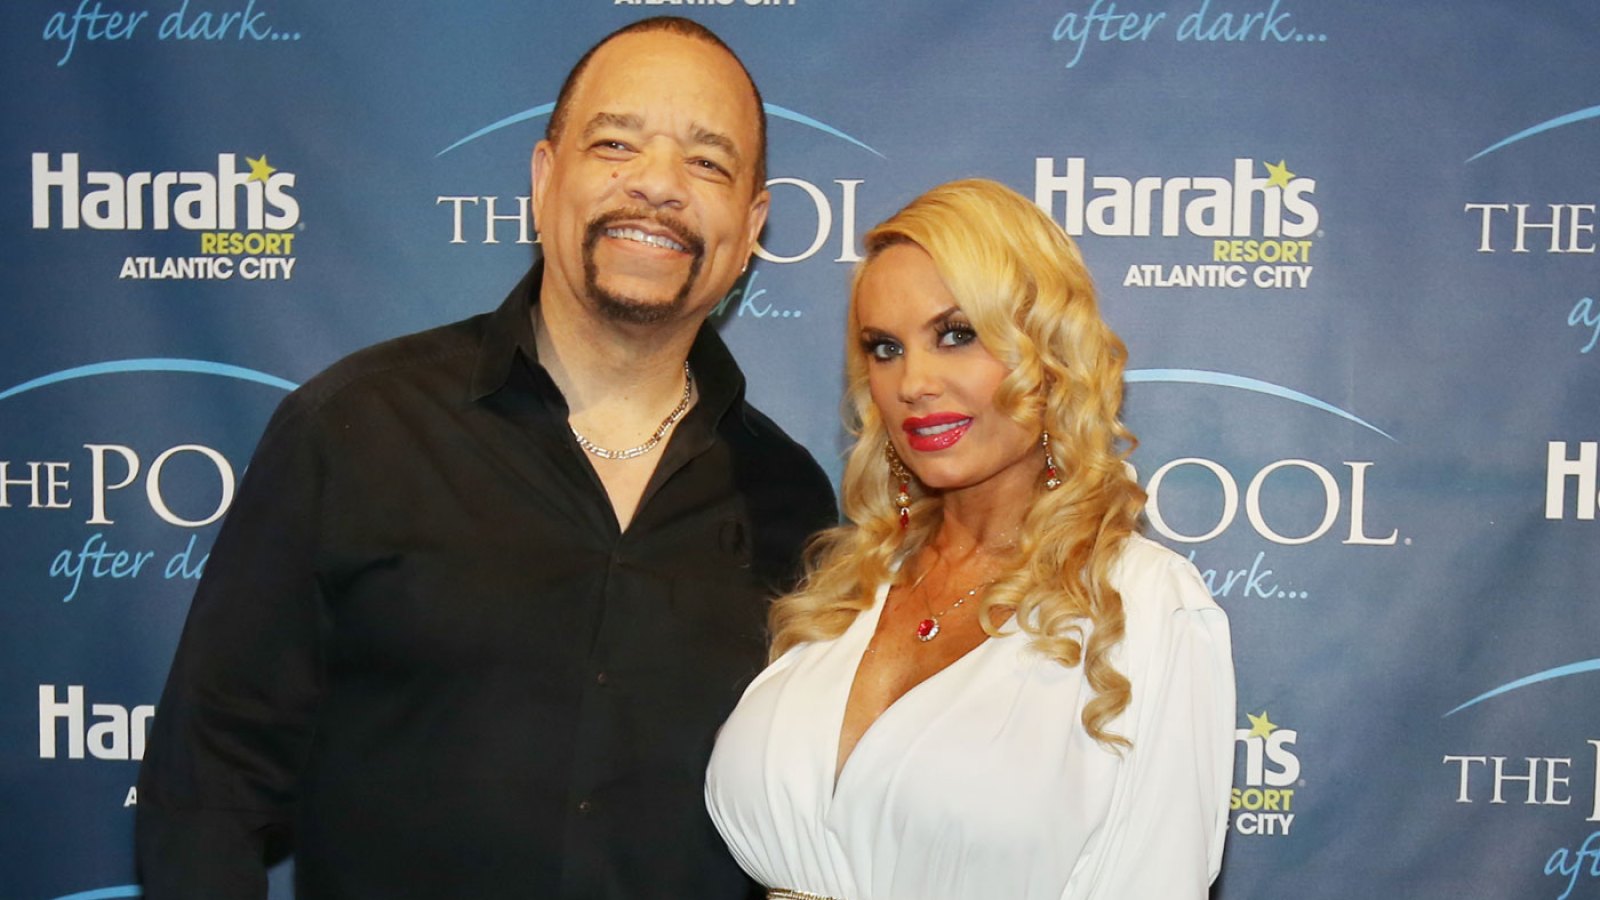 Coco Austin and Ice T's daughter Chanel has an Instagram account too now!